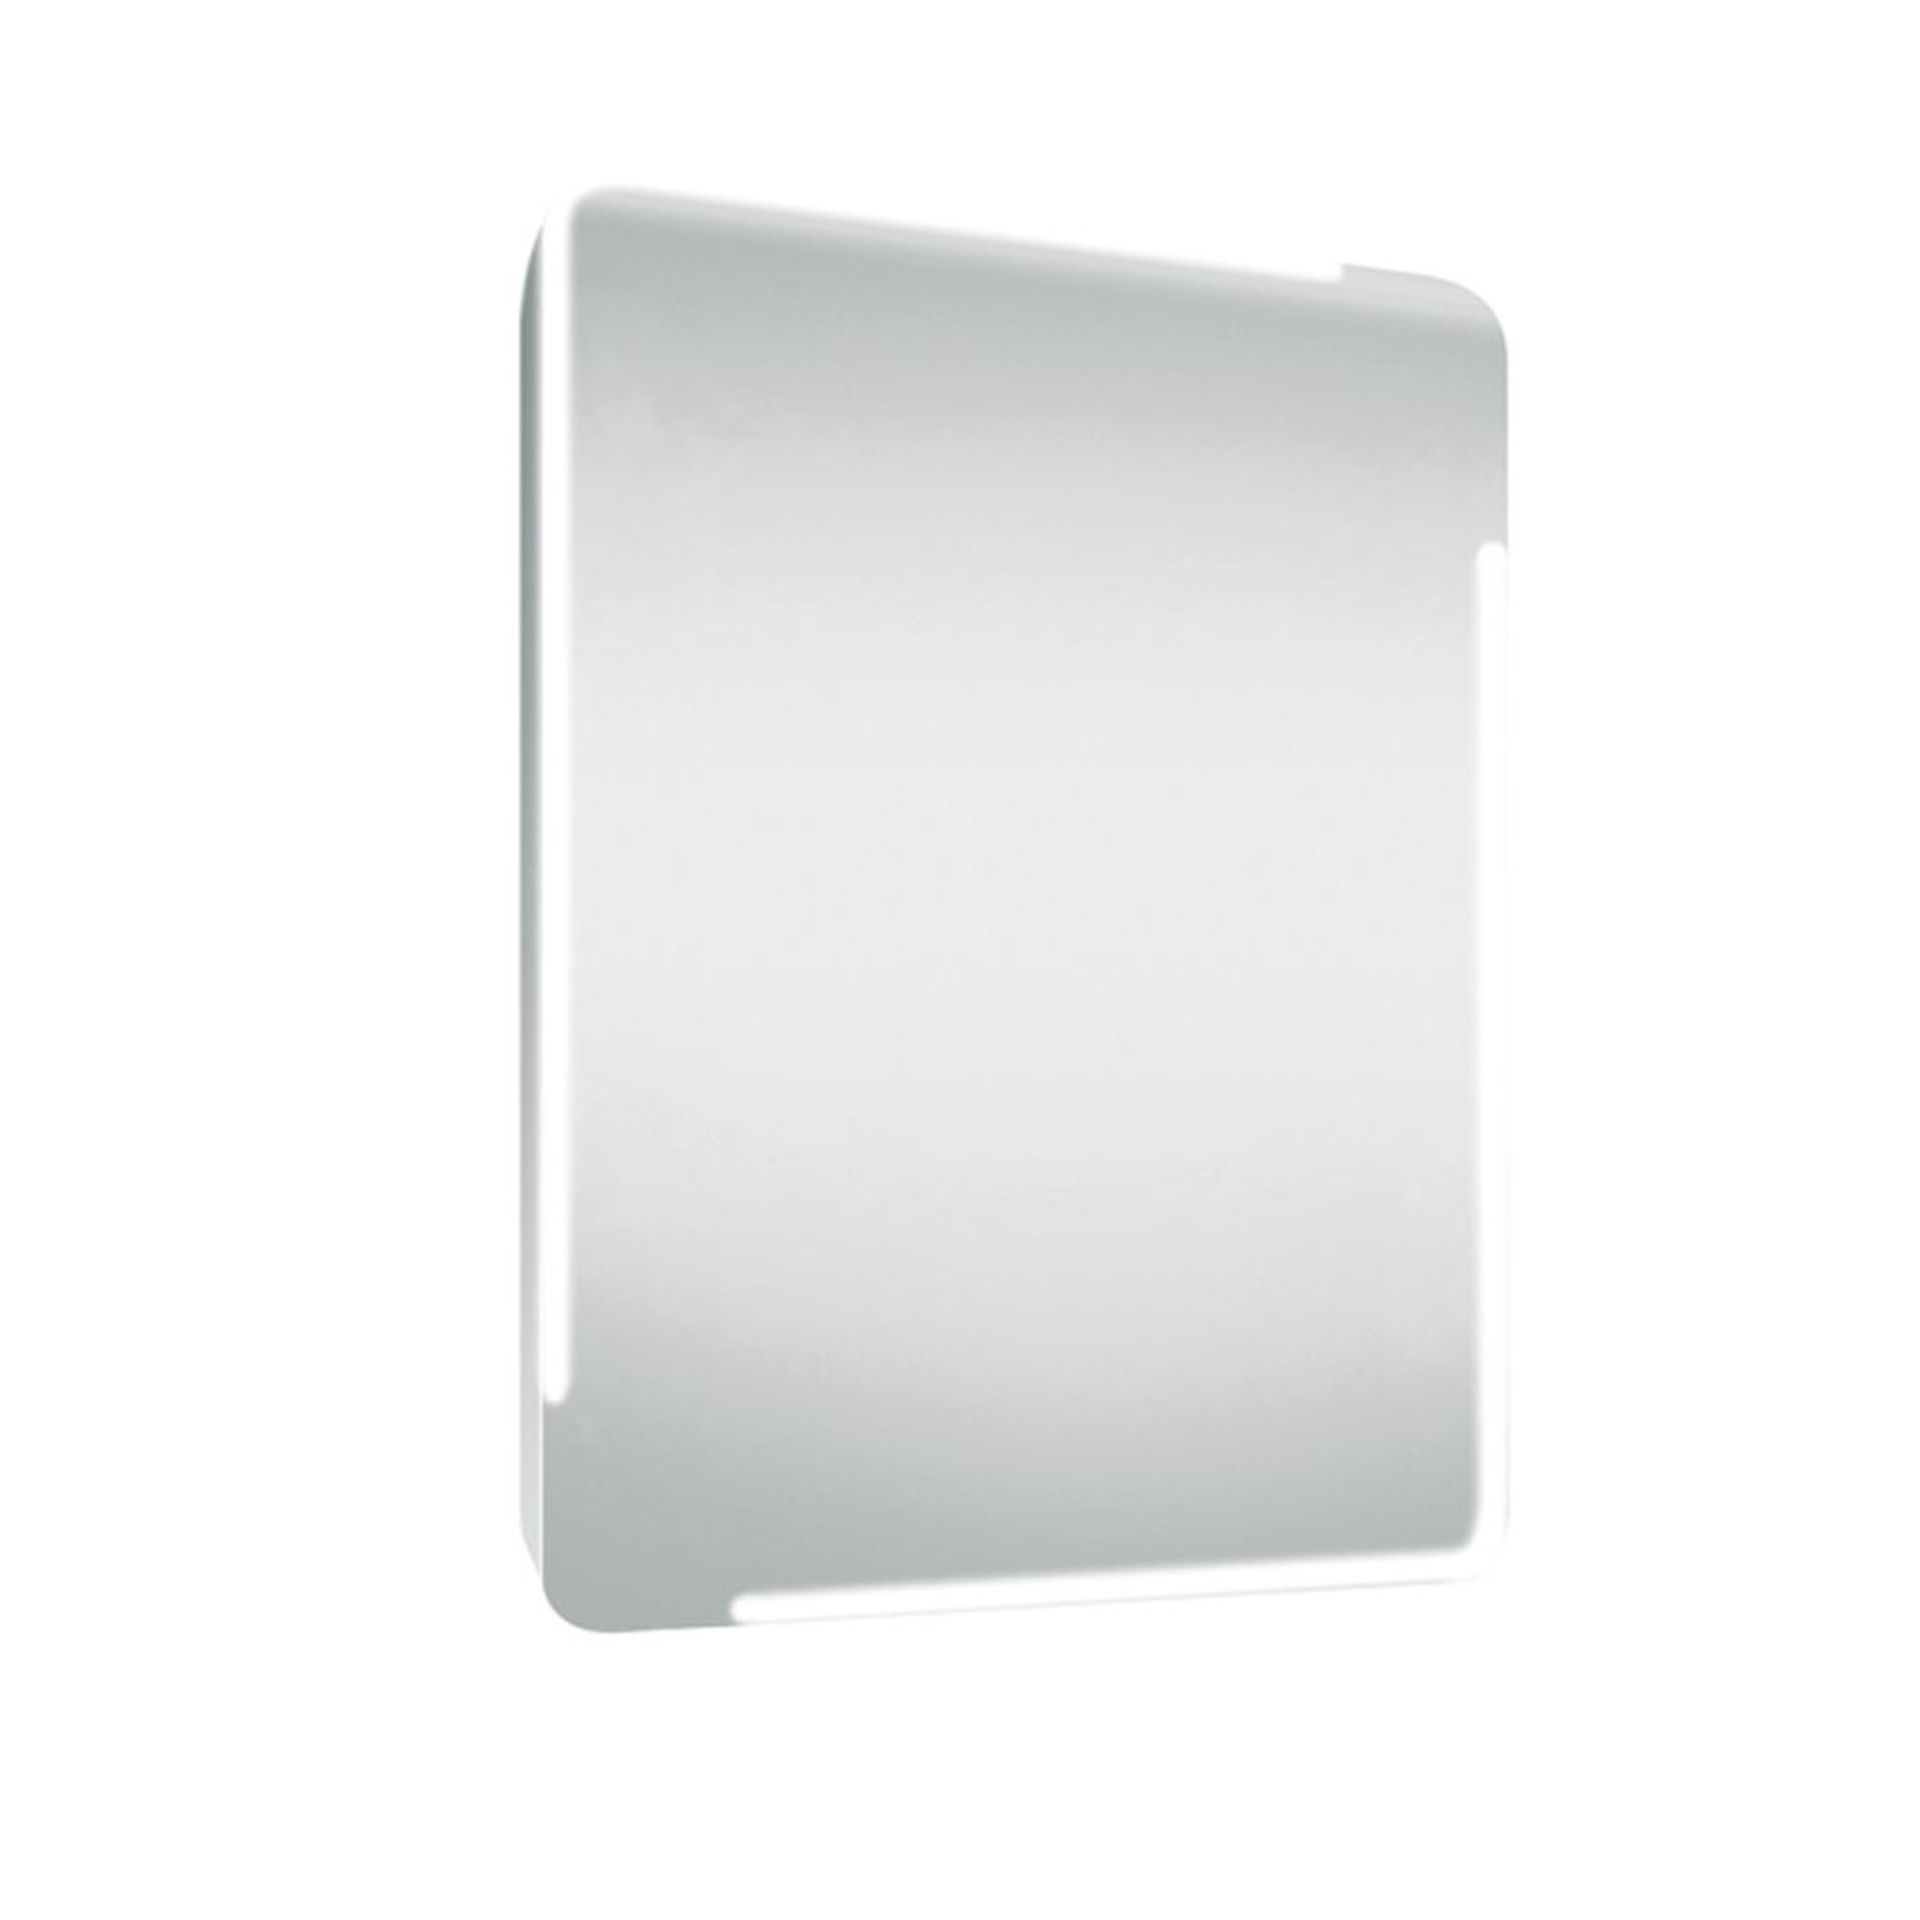 1 x Synergy Genoa LED Illuminated Bathroom Mirror With Touch Switch - 600x800mm - New - RRP £260 - Image 2 of 3